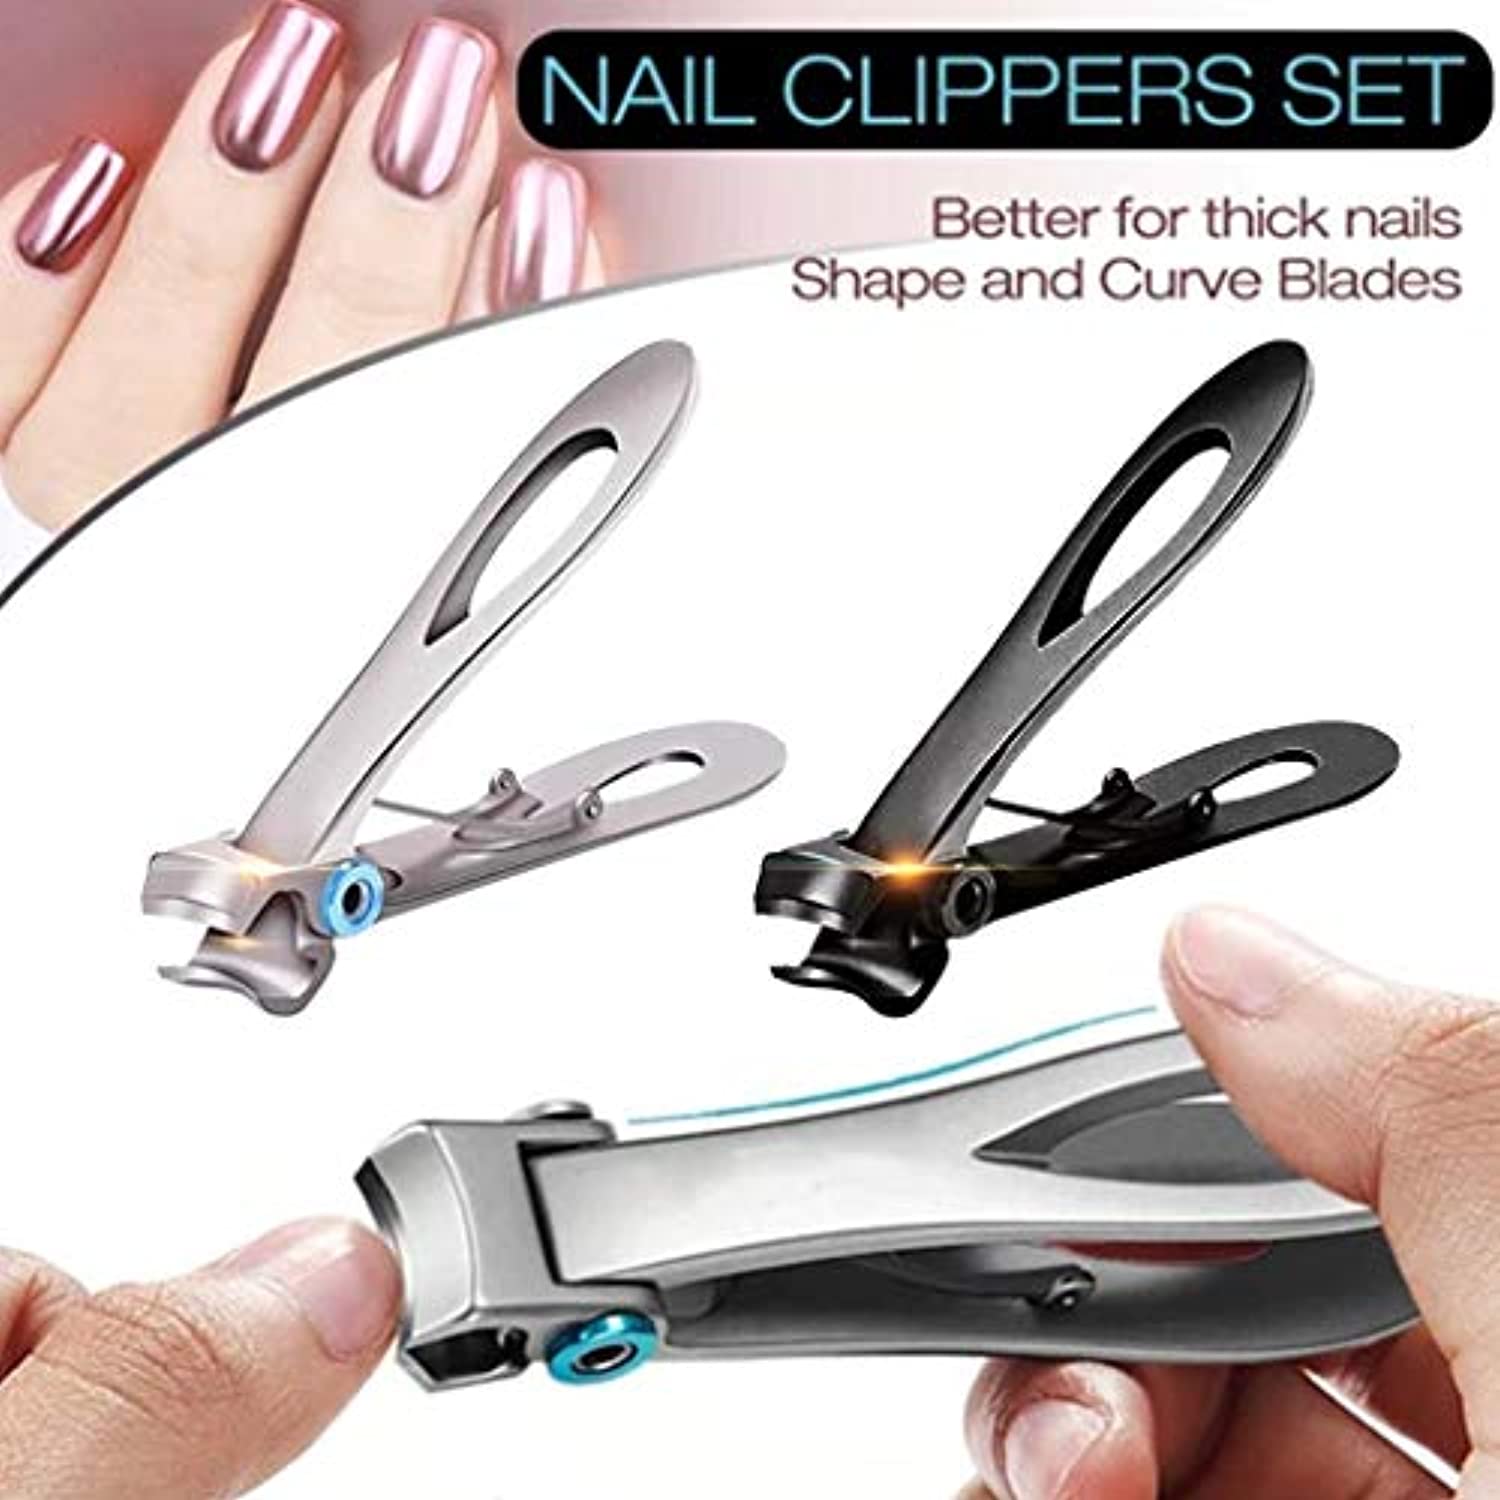 15mm Wide Jaw Opening Toenail Clipper,Ergonomics Finger Cutter Trimmer for Thick Nails,Oversized Stainless Steel Fingernail Clippers for Ingrown for Men,Tough Nails,Seniors,Adults (Silver)